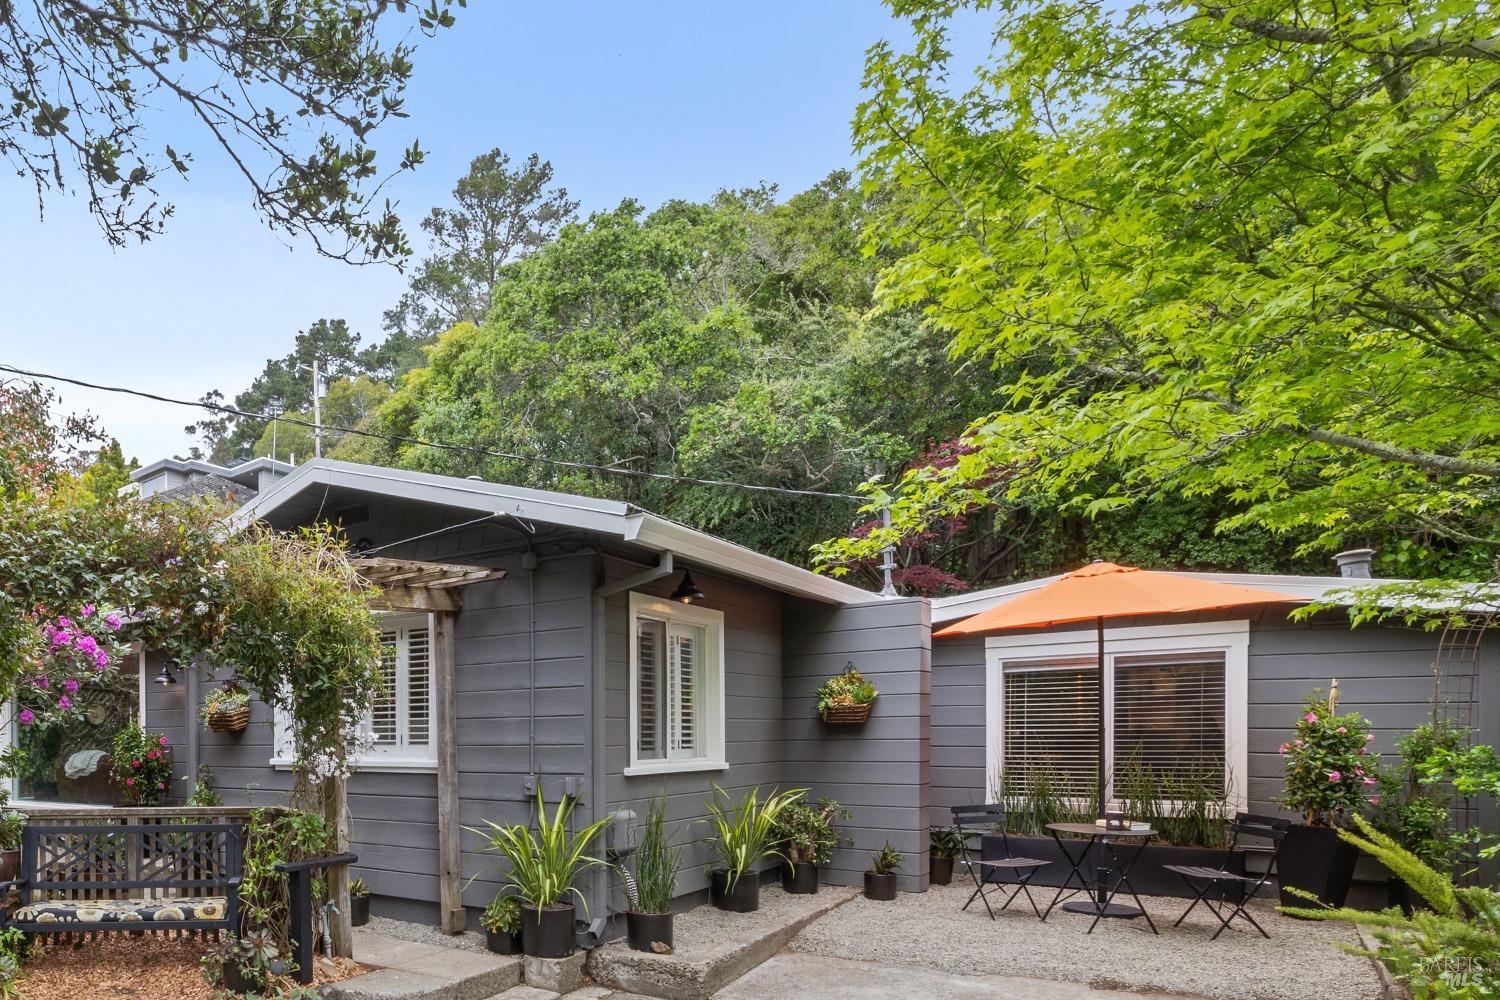 Photo of 191 Janes St in Mill Valley, CA